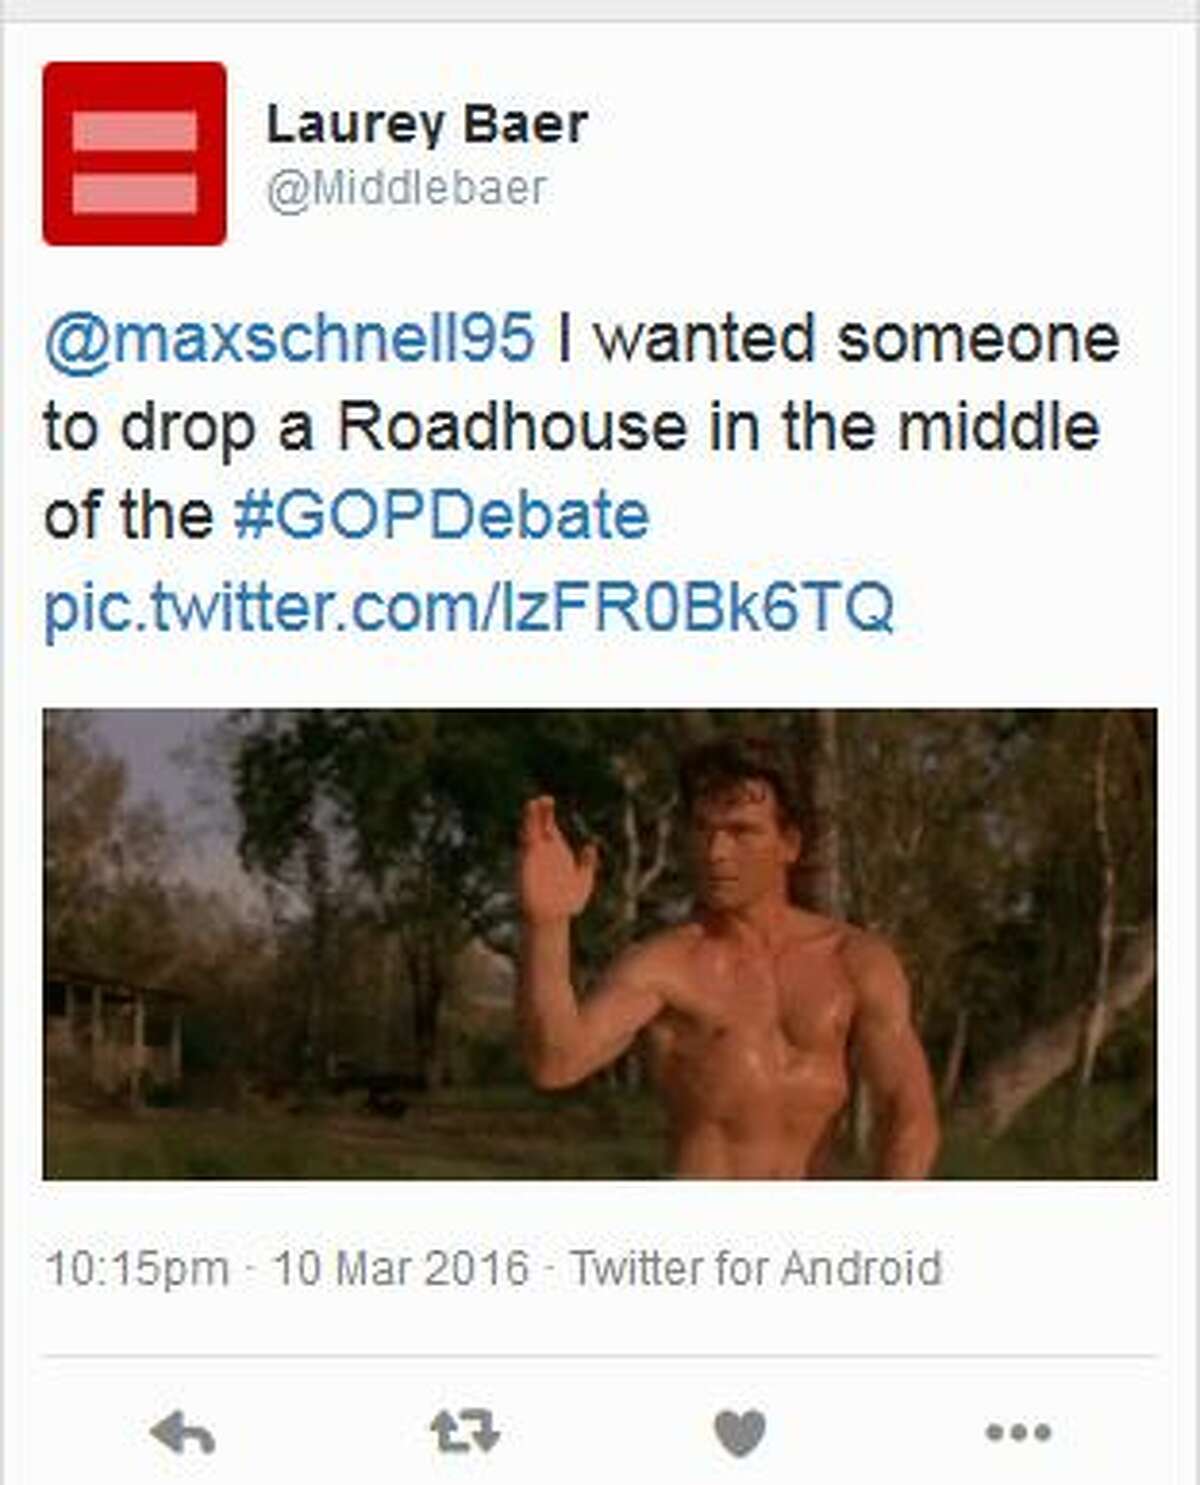 @Middlebaer: I wanted someone to drop a Roadhouse in the middle of the #GOPDebate